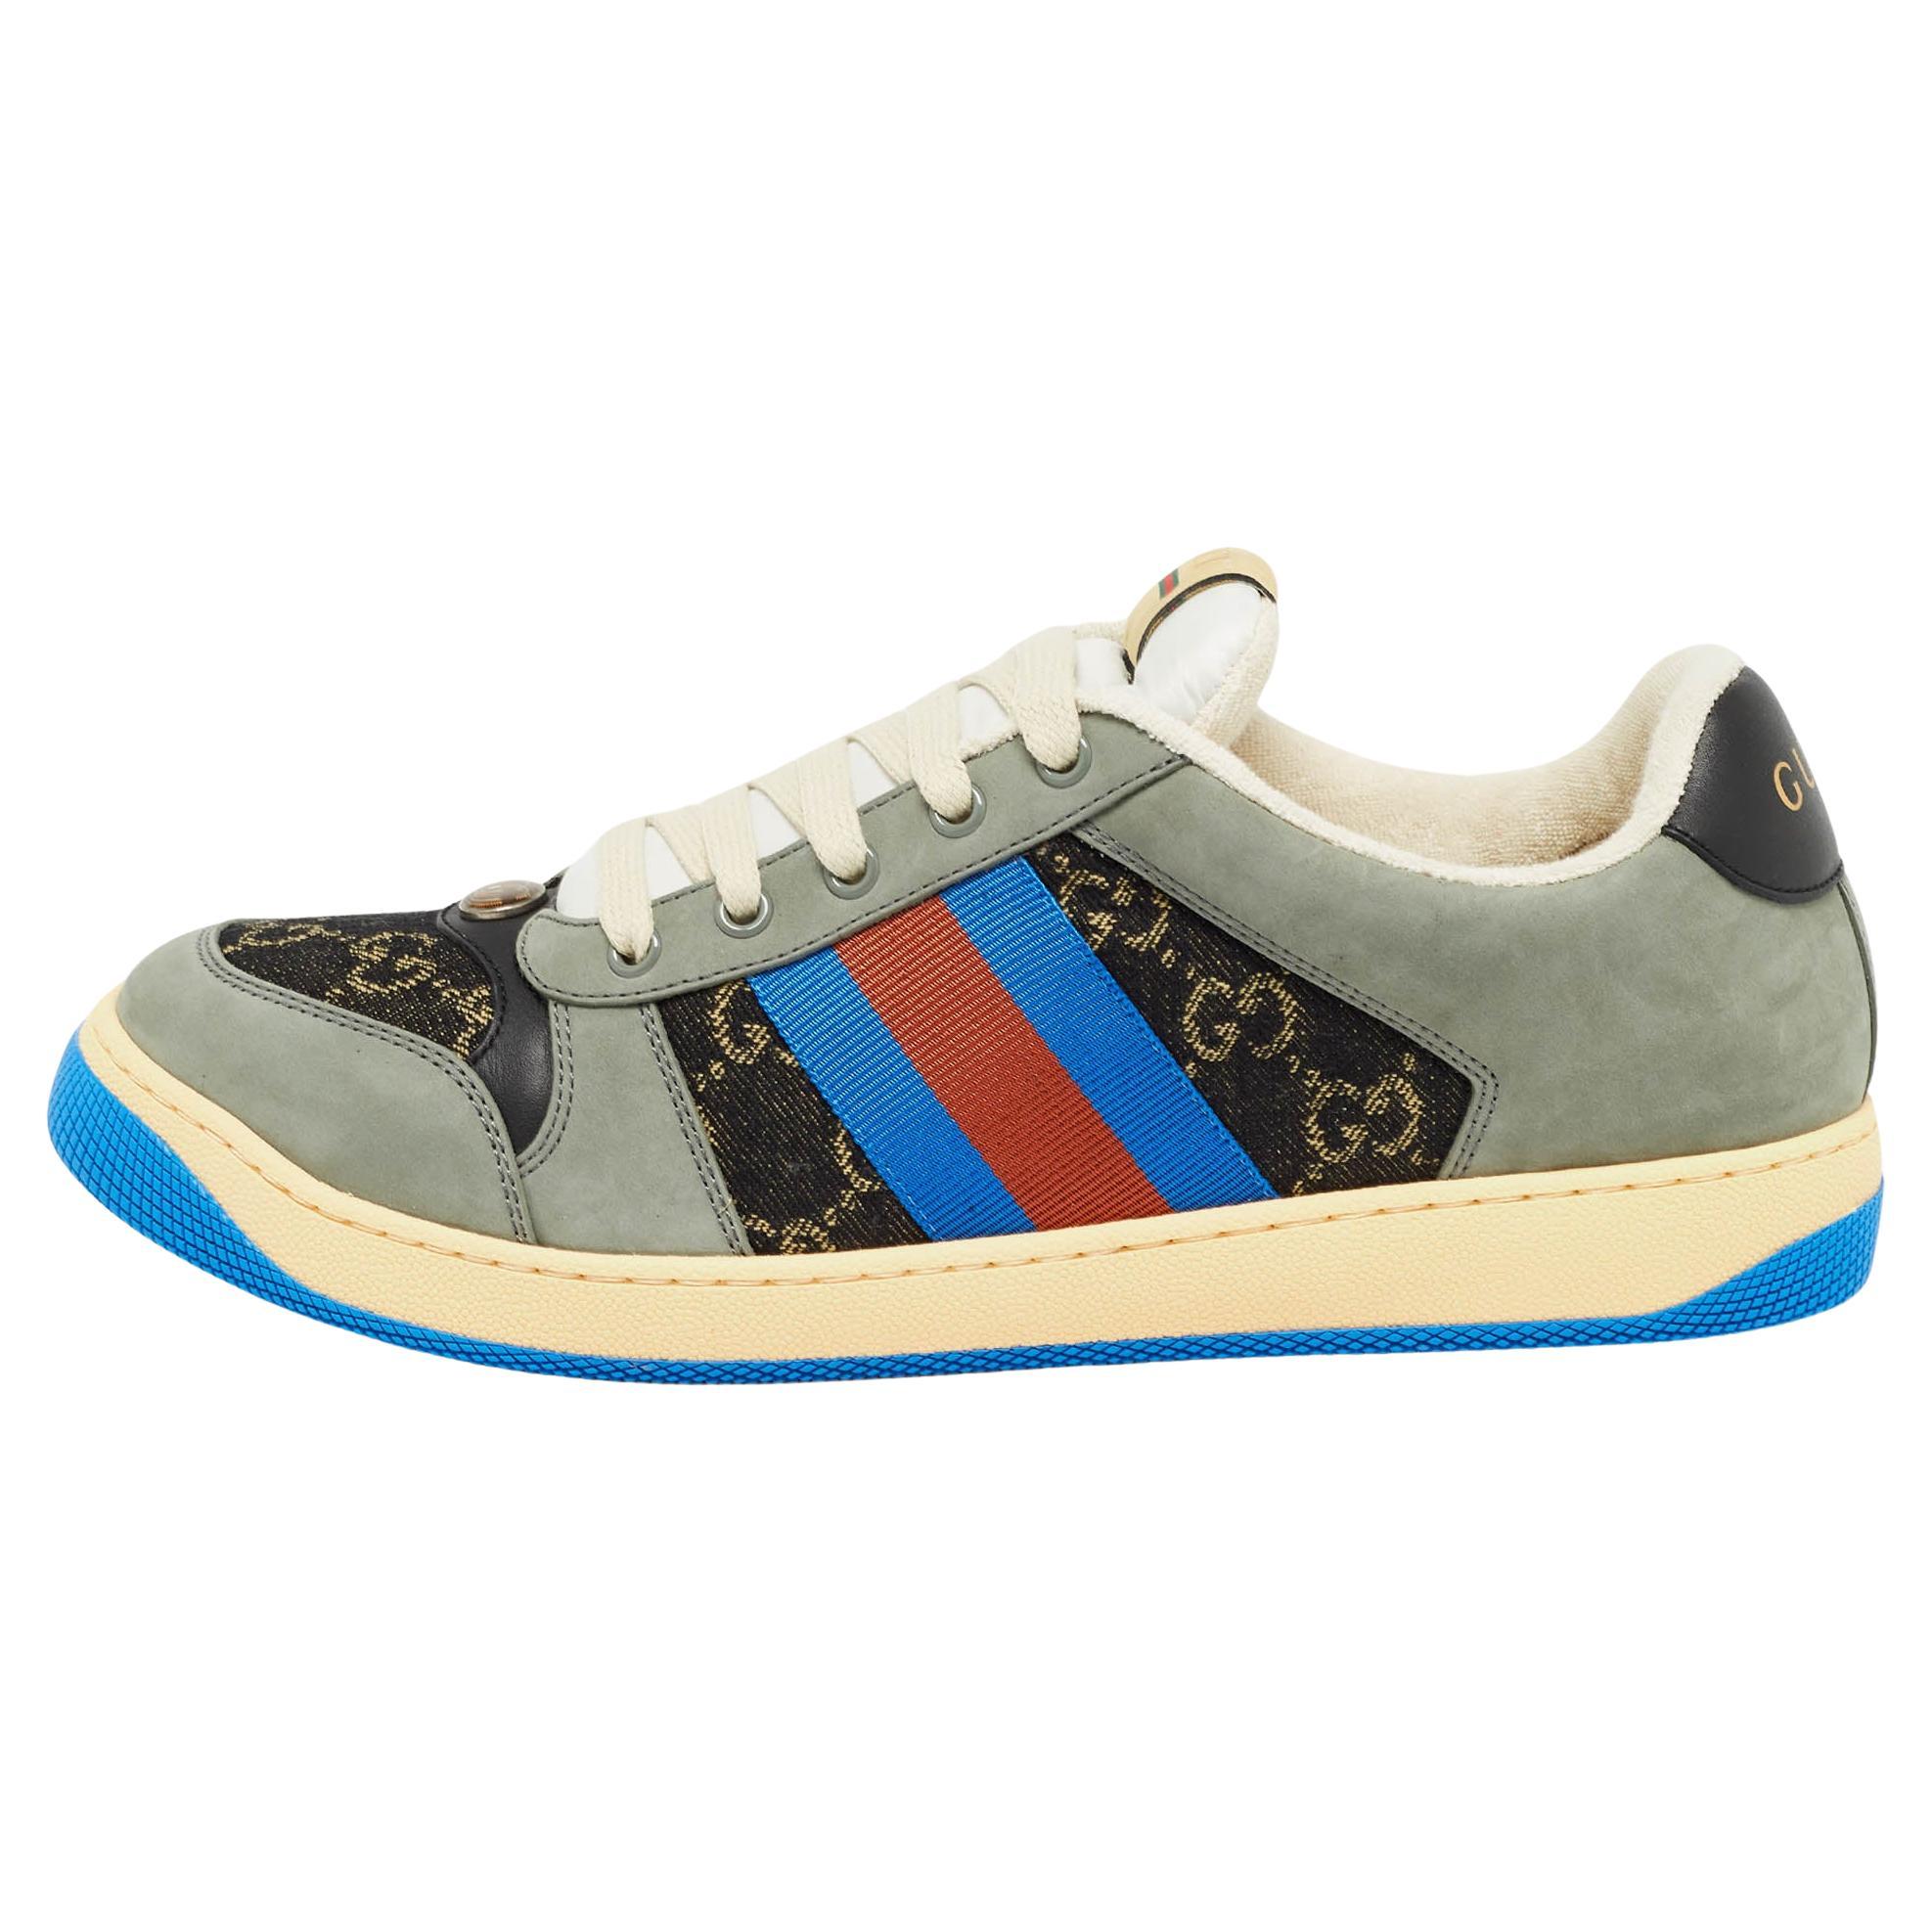 Gucci Multicolor GG Canvas and Nubuck Leather Screener Sneakers Size 44.5